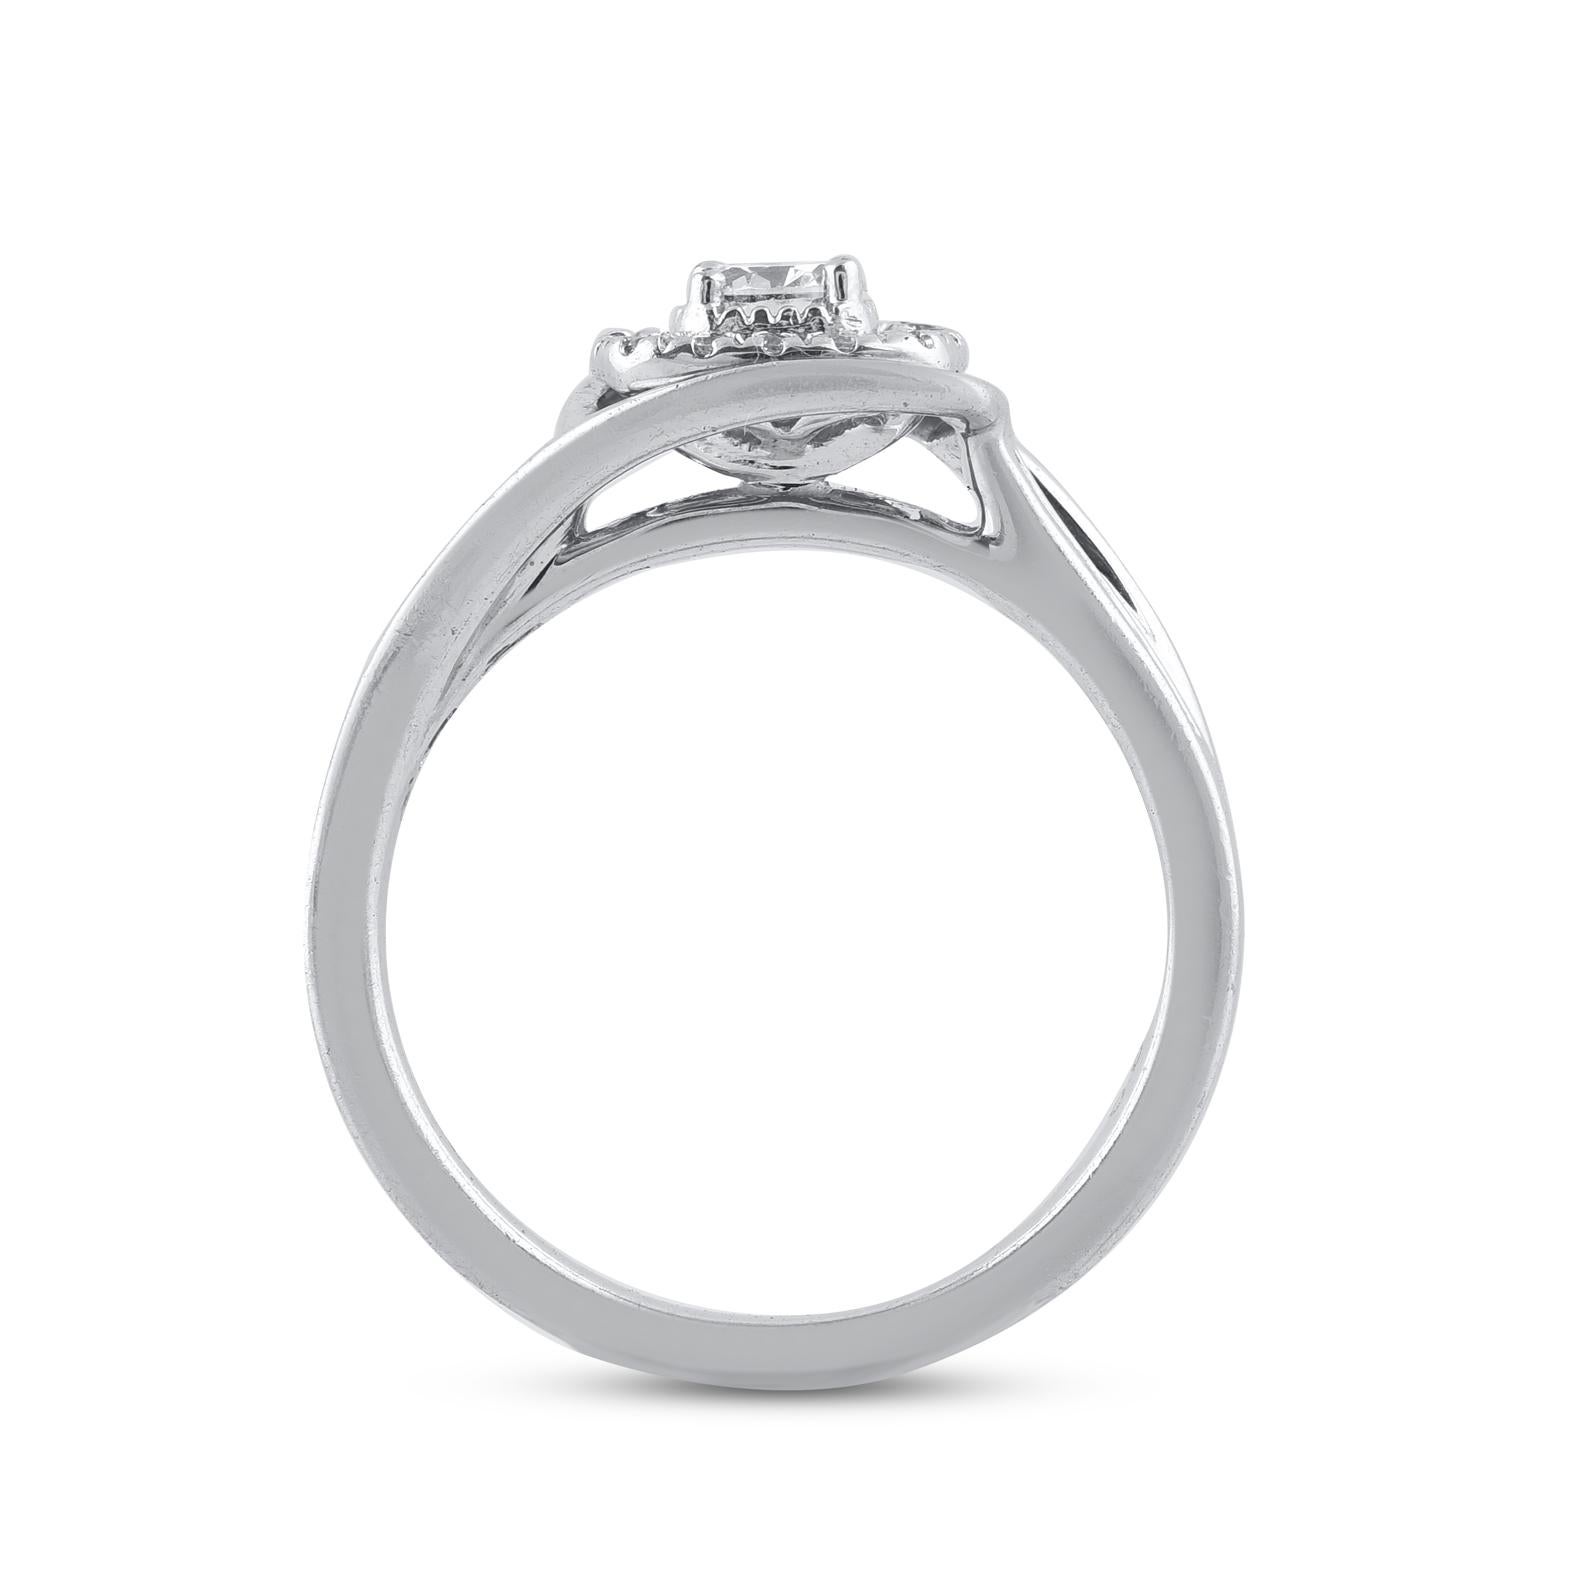 TJD 0.50 Carat Round & Baguette Diamond 14KT White Gold Engagement Ring In New Condition For Sale In New York, NY